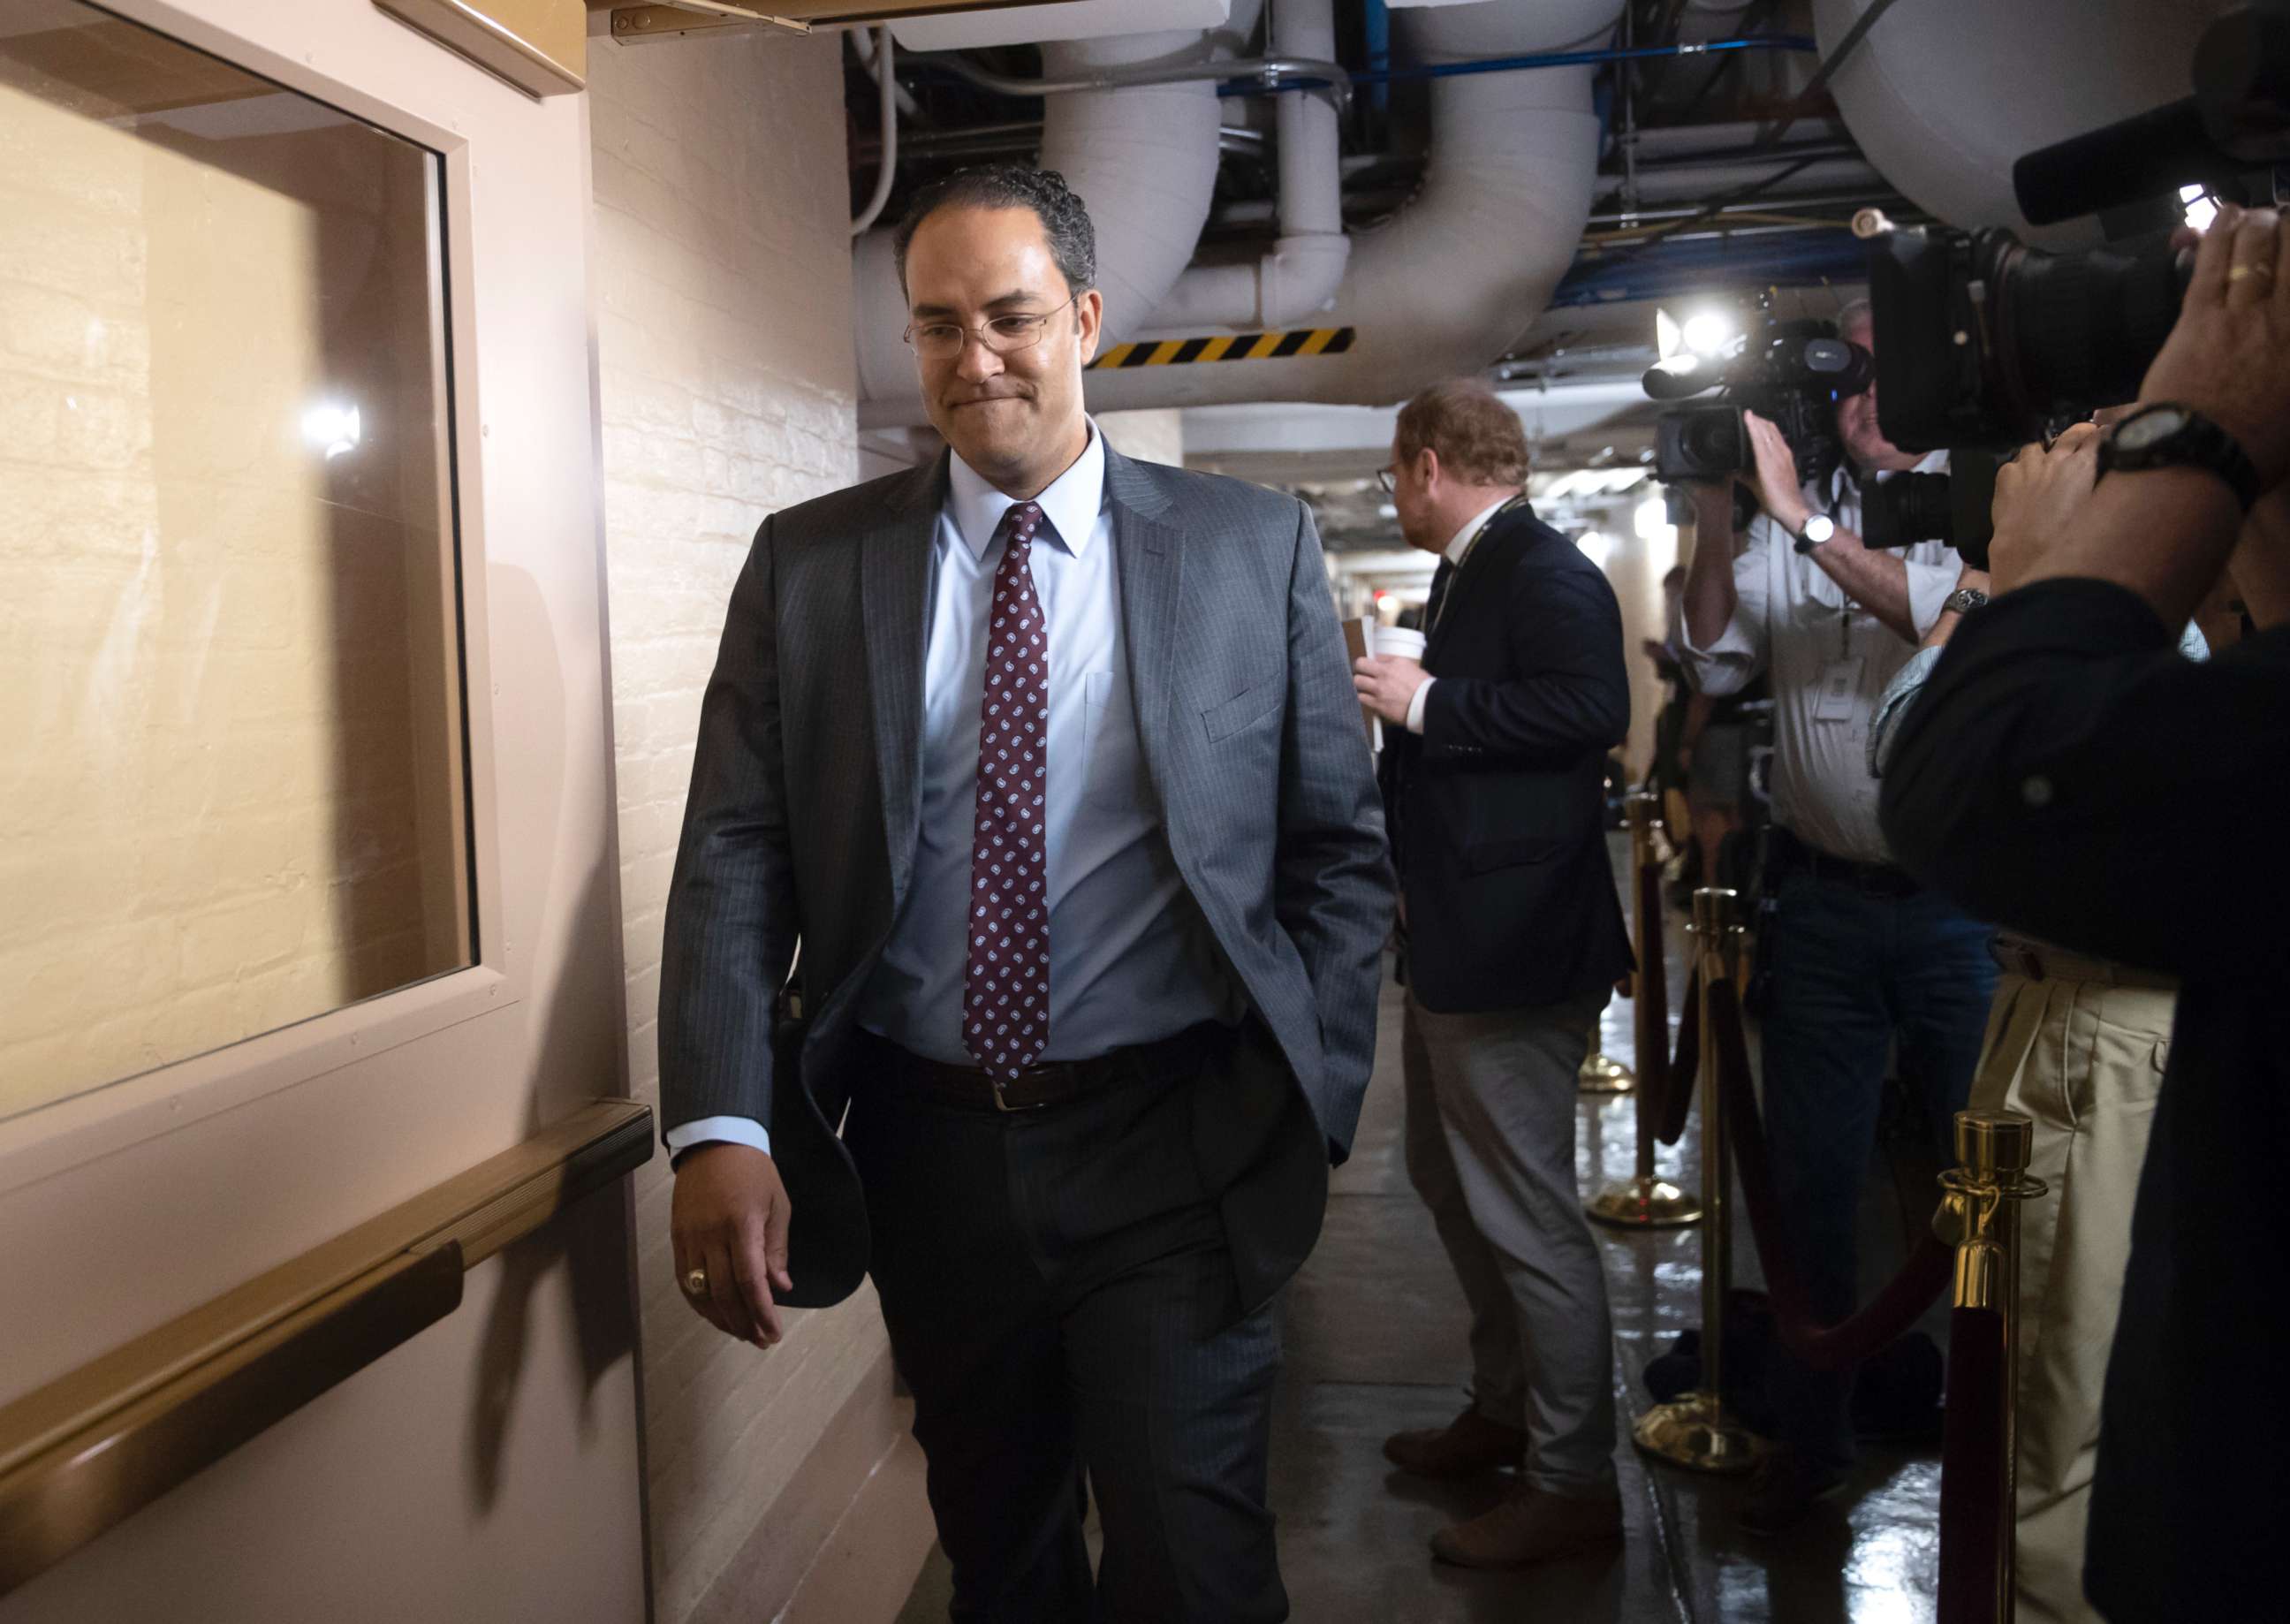 PHOTO: Rep. Will Hurd, whose congressional district runs along the majority of Texas's border with Mexico, arrives for a closed-door GOP meeting in the basement of the Capitol in Washington, June 7, 2018.